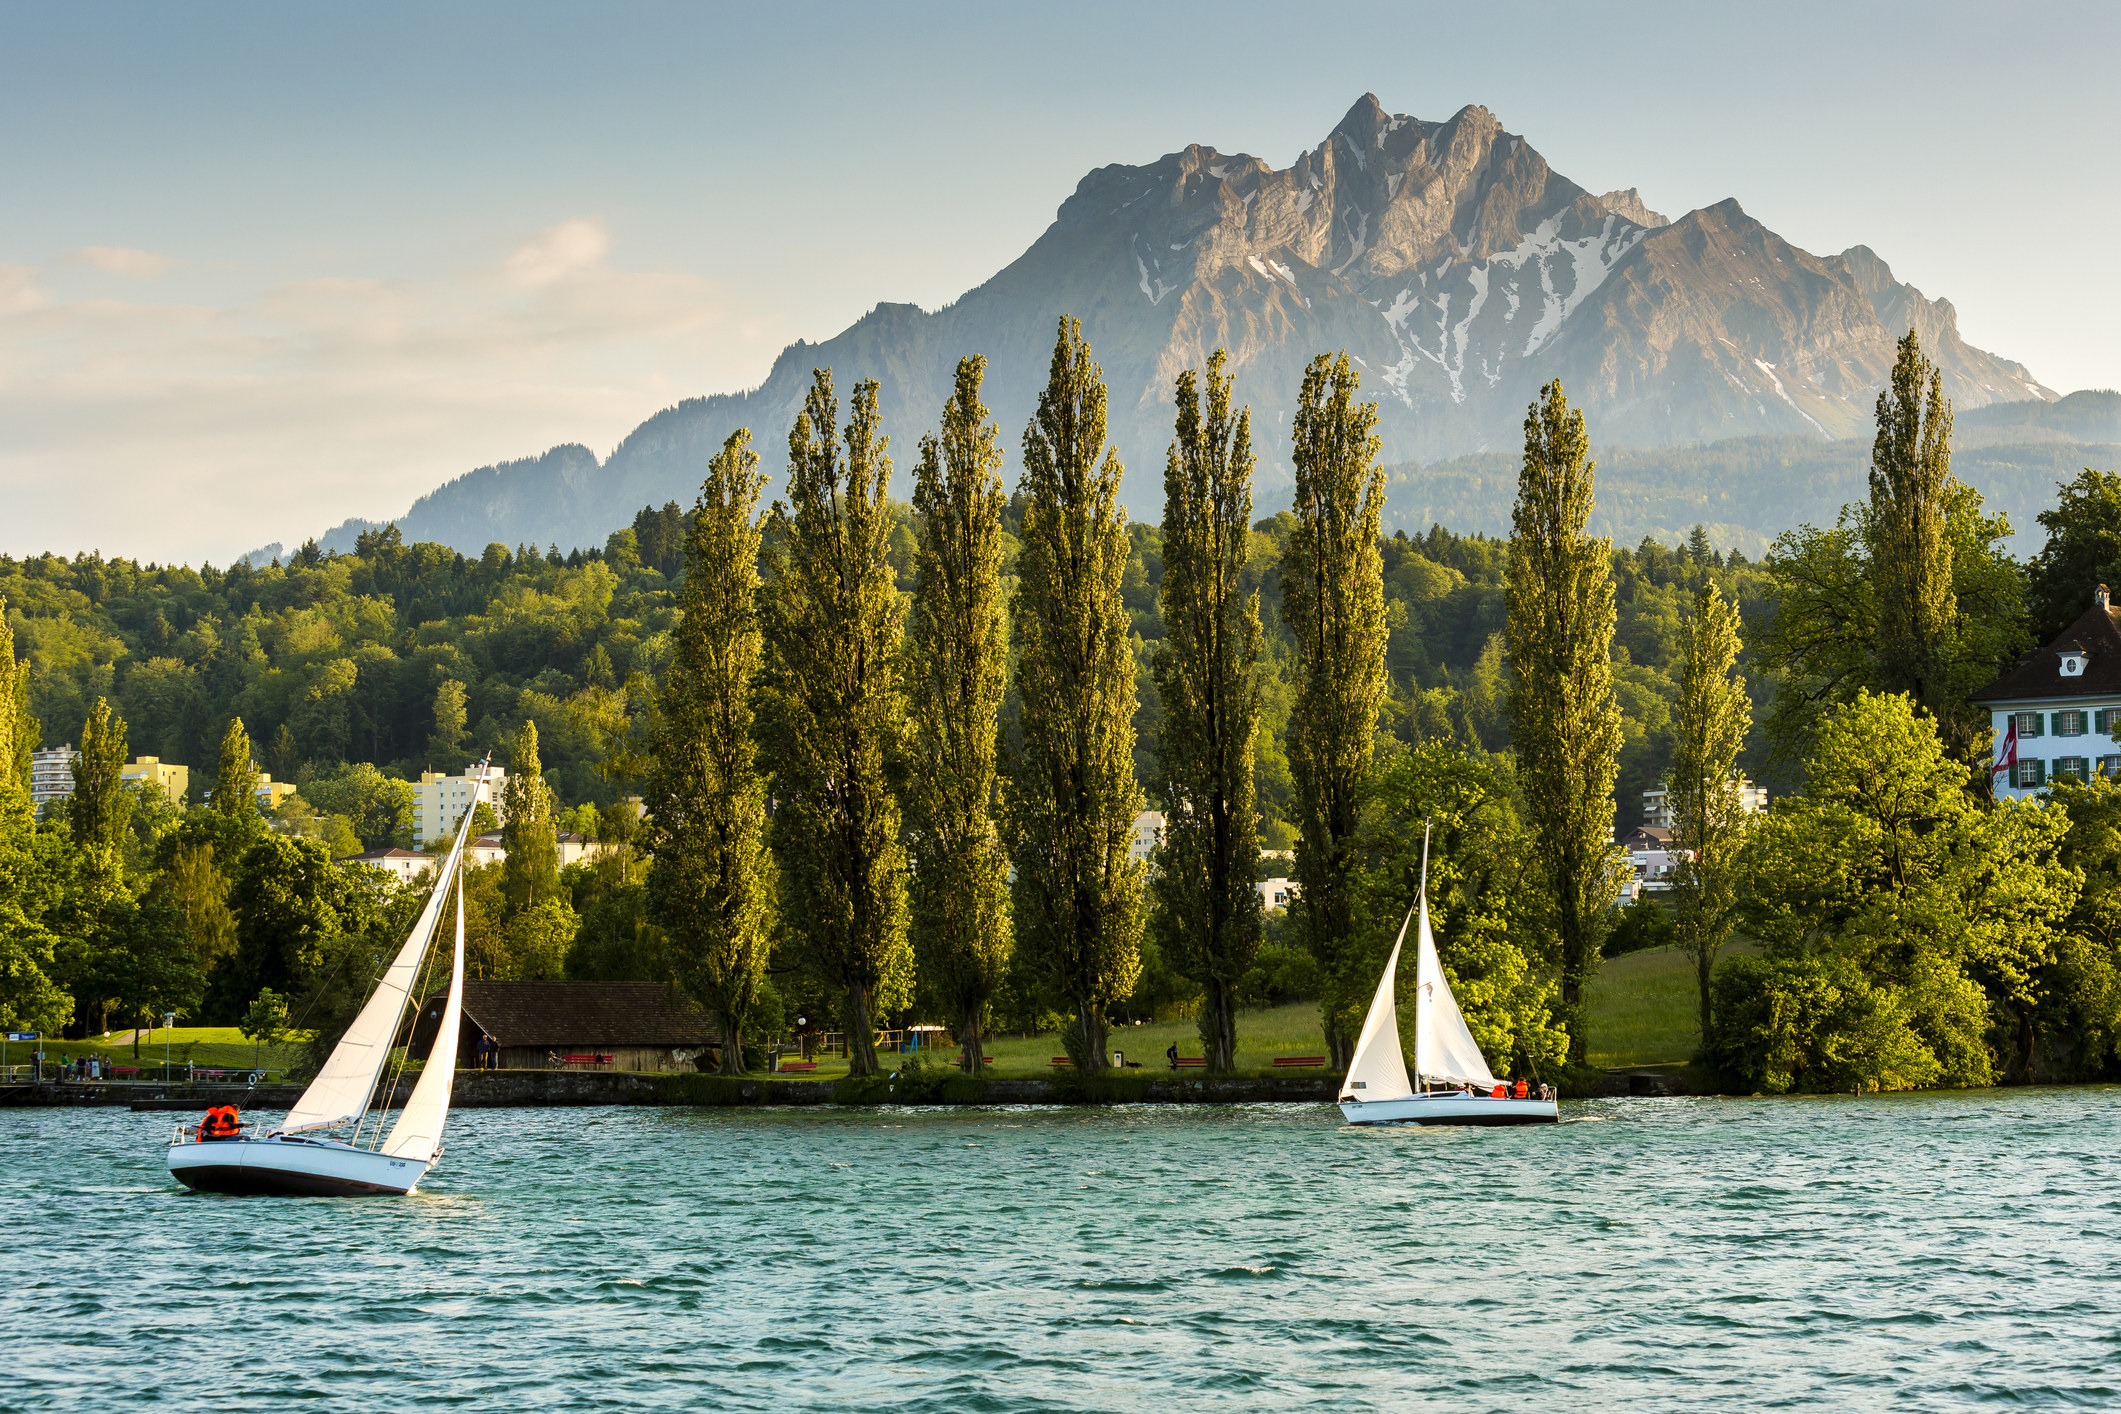 Boats on Lake Lucerne with the Alps in the background.